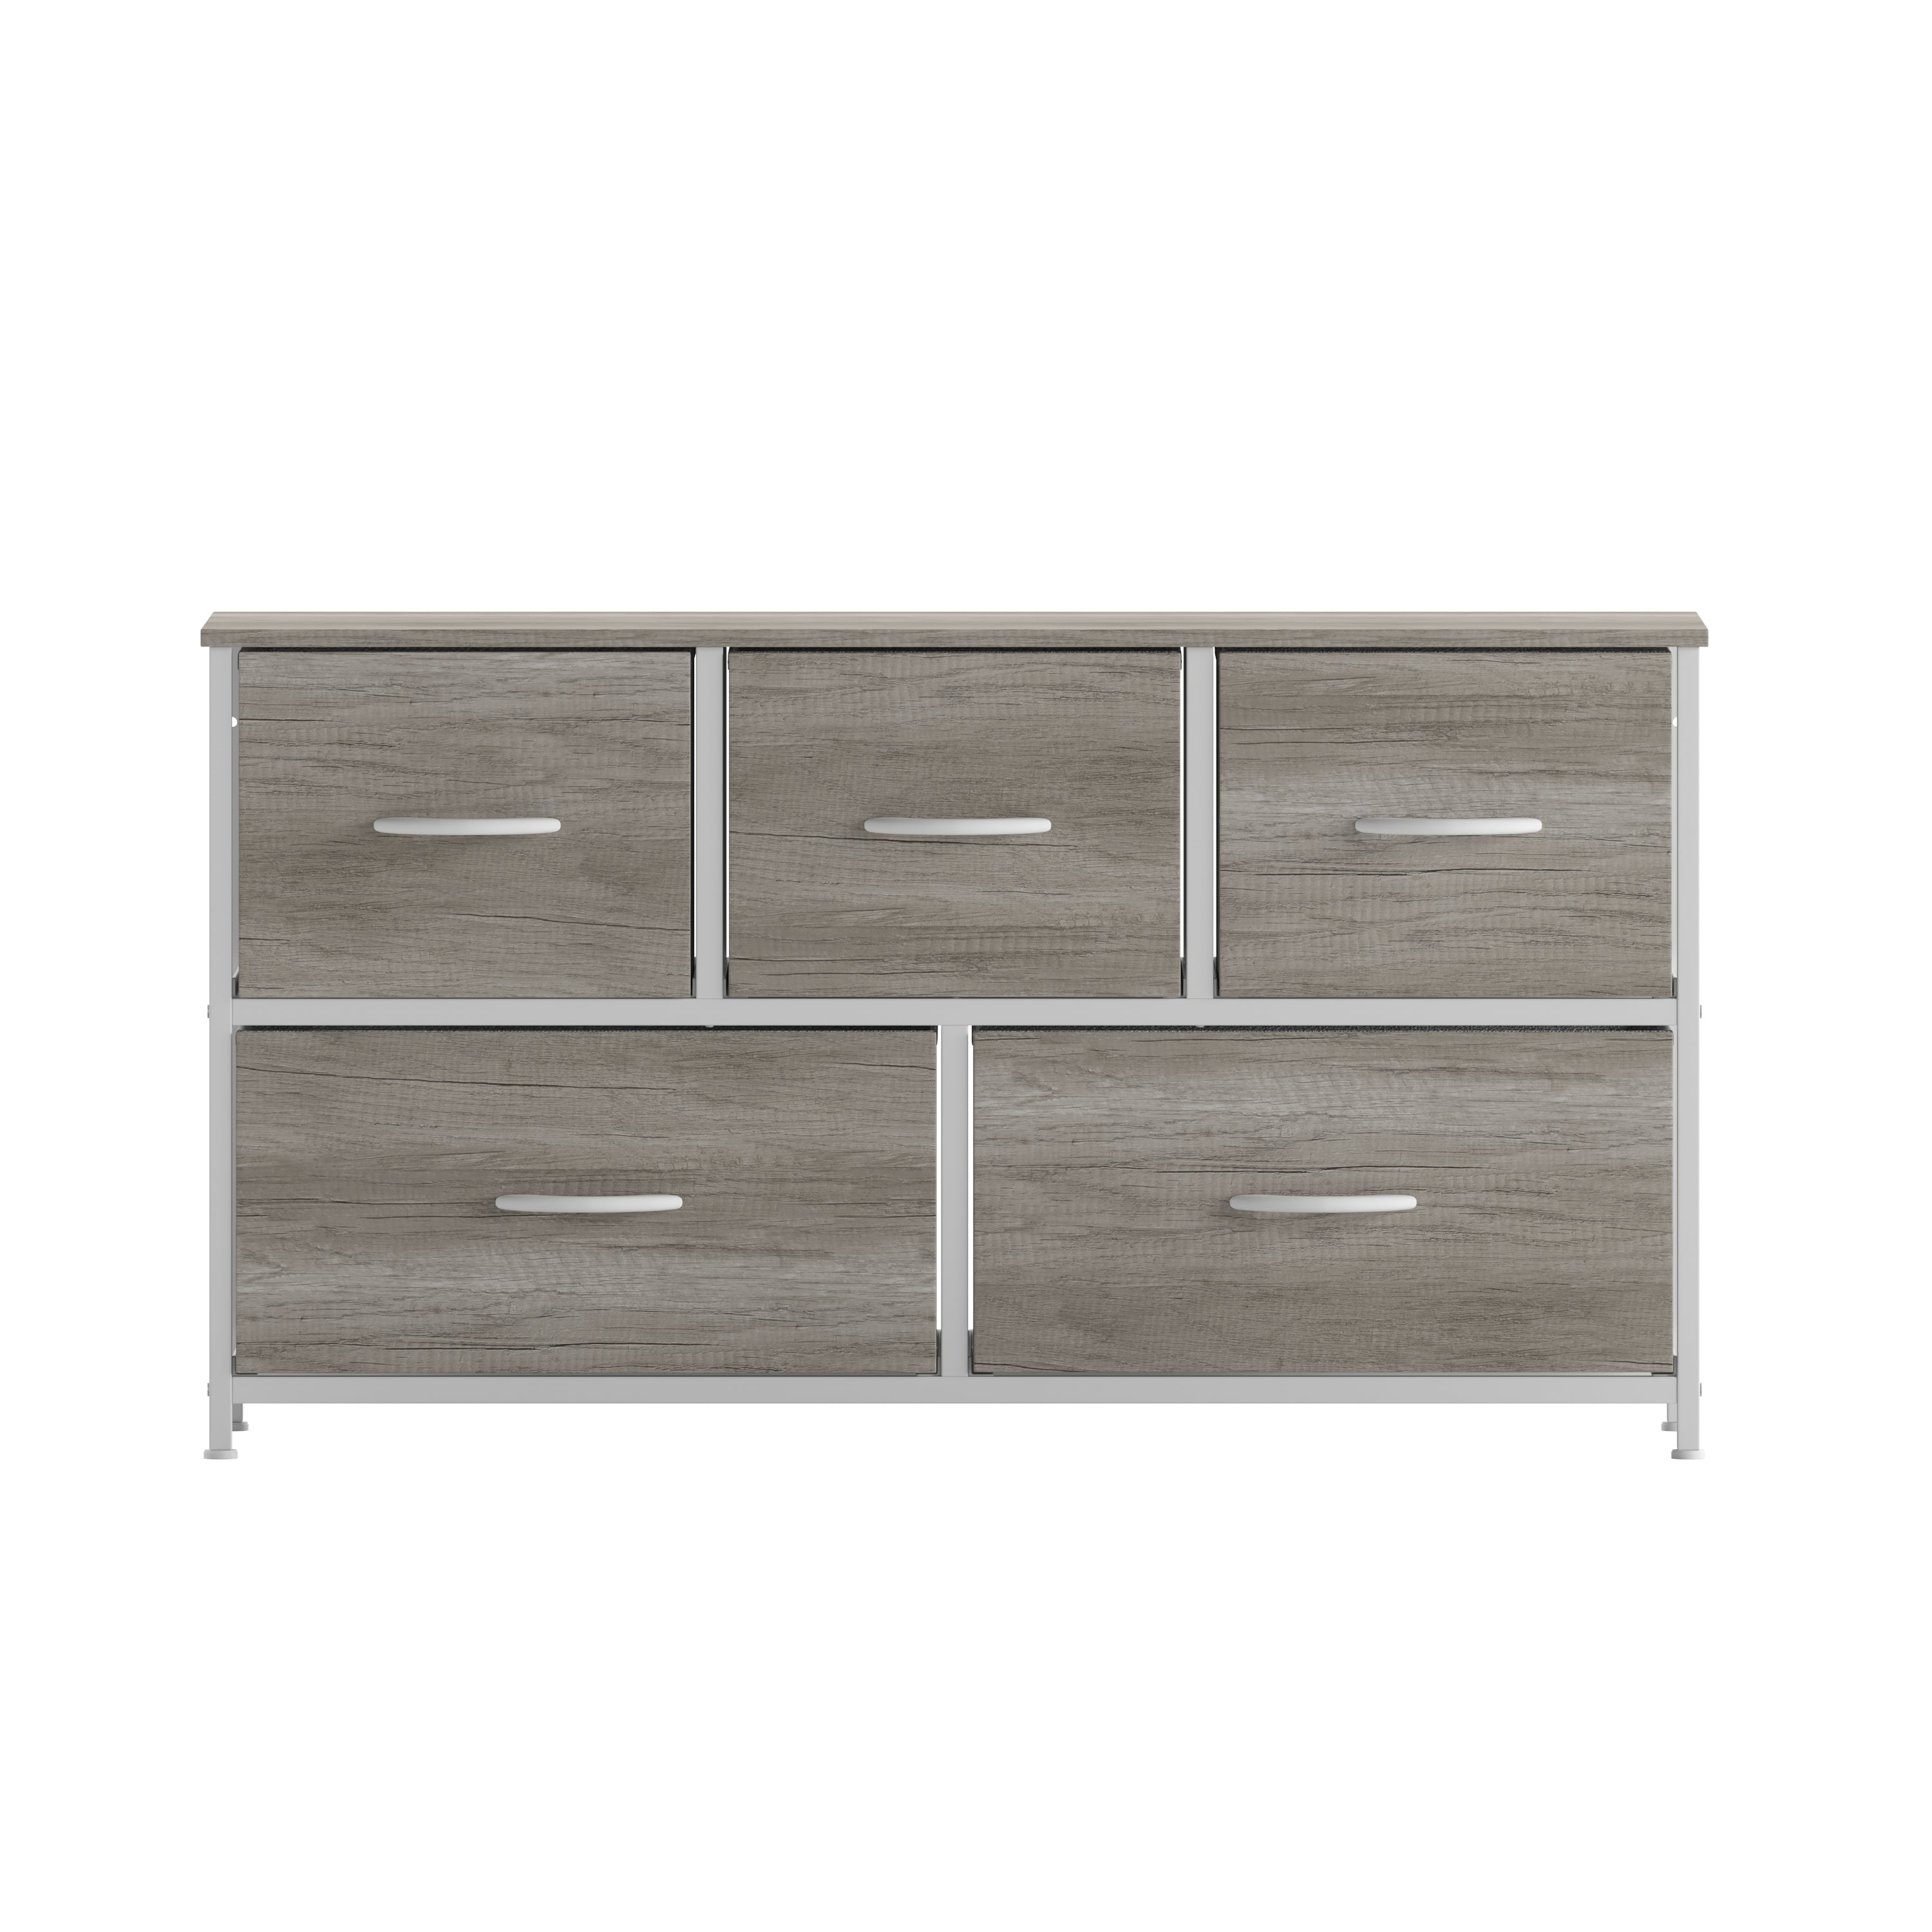 Harris 5 Drawer Vertical Storage Dresser with Cast Iron Frame, Wood Top, and Easy Pull Fabric Drawers with Wooden Handles-Dresser-Flash Furniture-Wall2Wall Furnishings